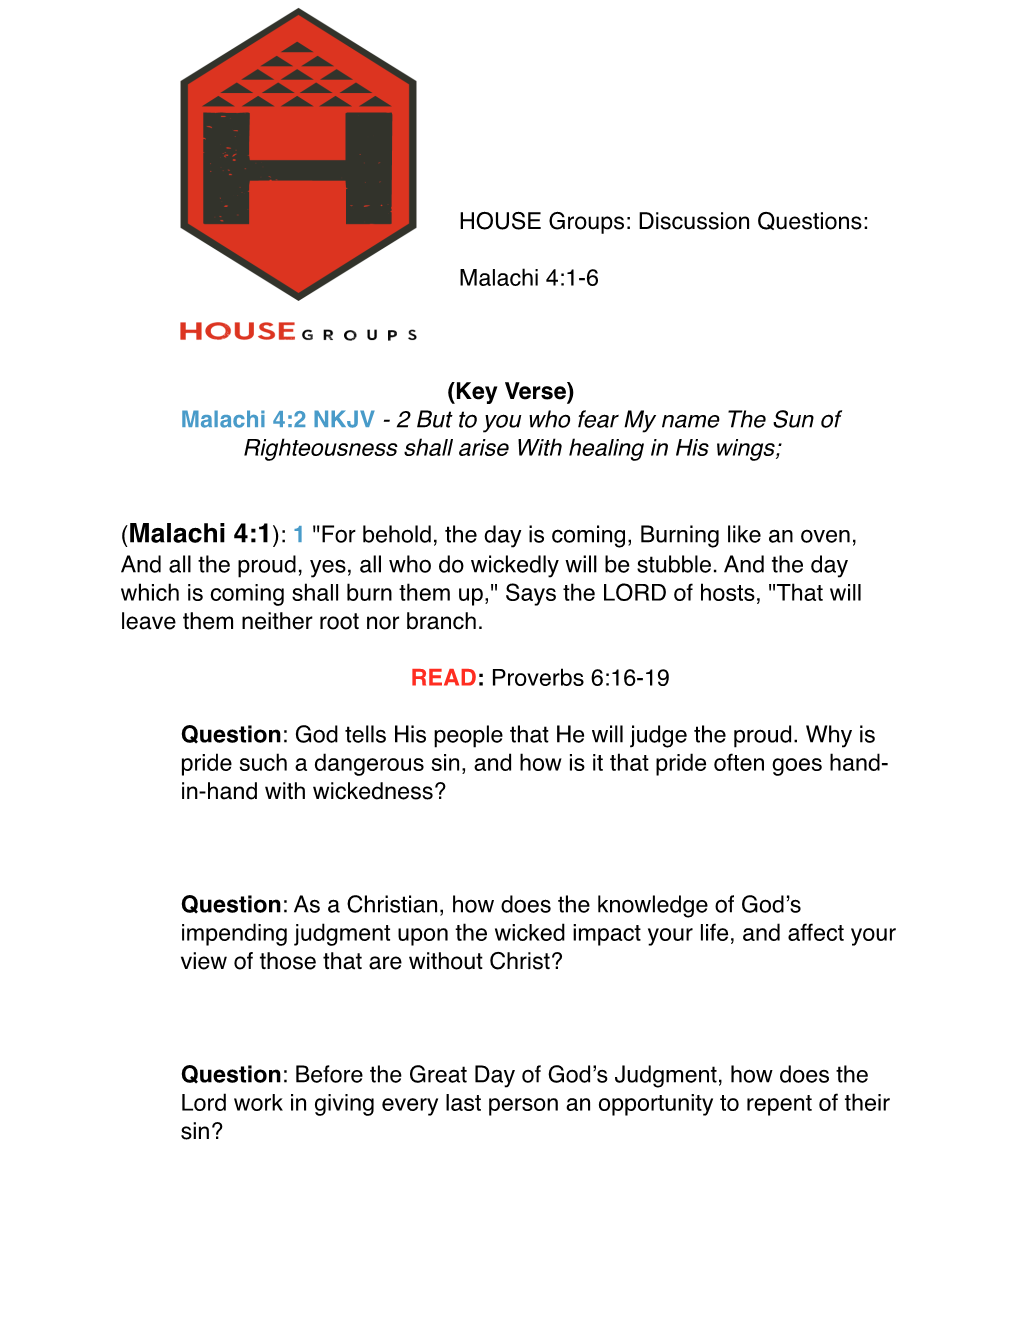 HOUSE Groups: Discussion Questions: Malachi 4:1-6 (Key